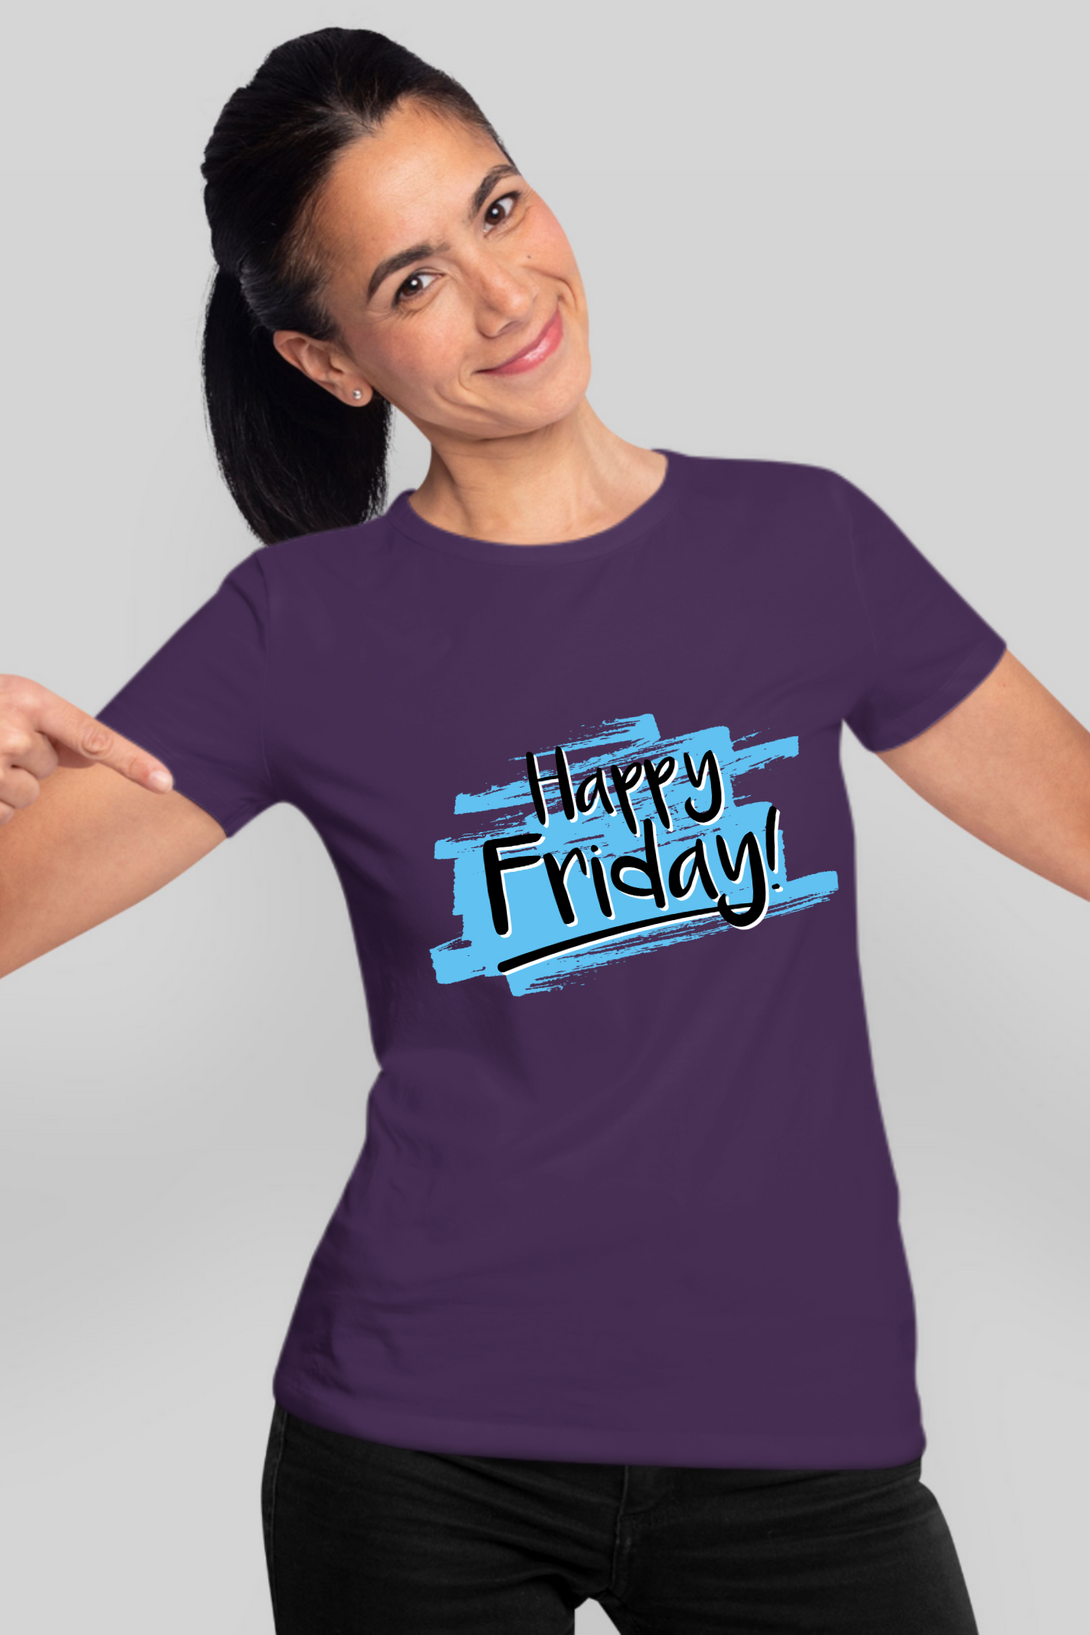 Happy Friday Printed T-Shirt For Women - WowWaves - 11